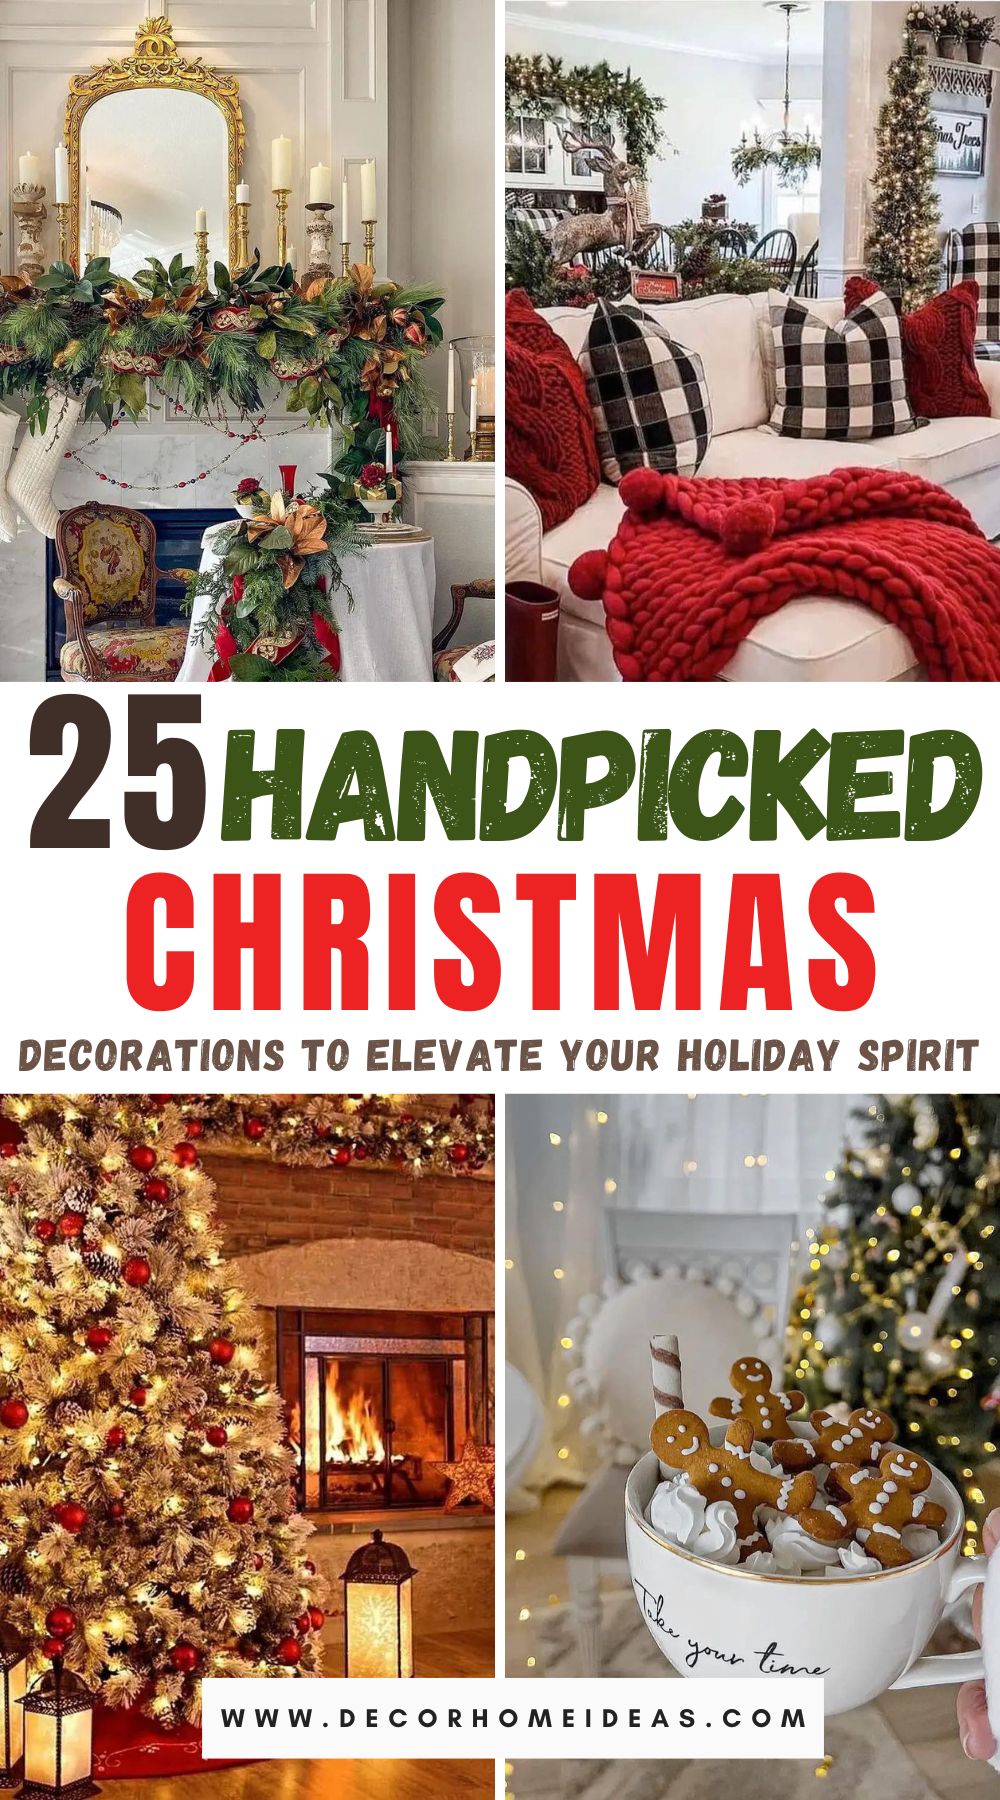 Searching for the best Christmas decorations? Explore 25 creative ideas to add festive charm to your space, from elegant ornaments to cozy lighting. Get inspired now!